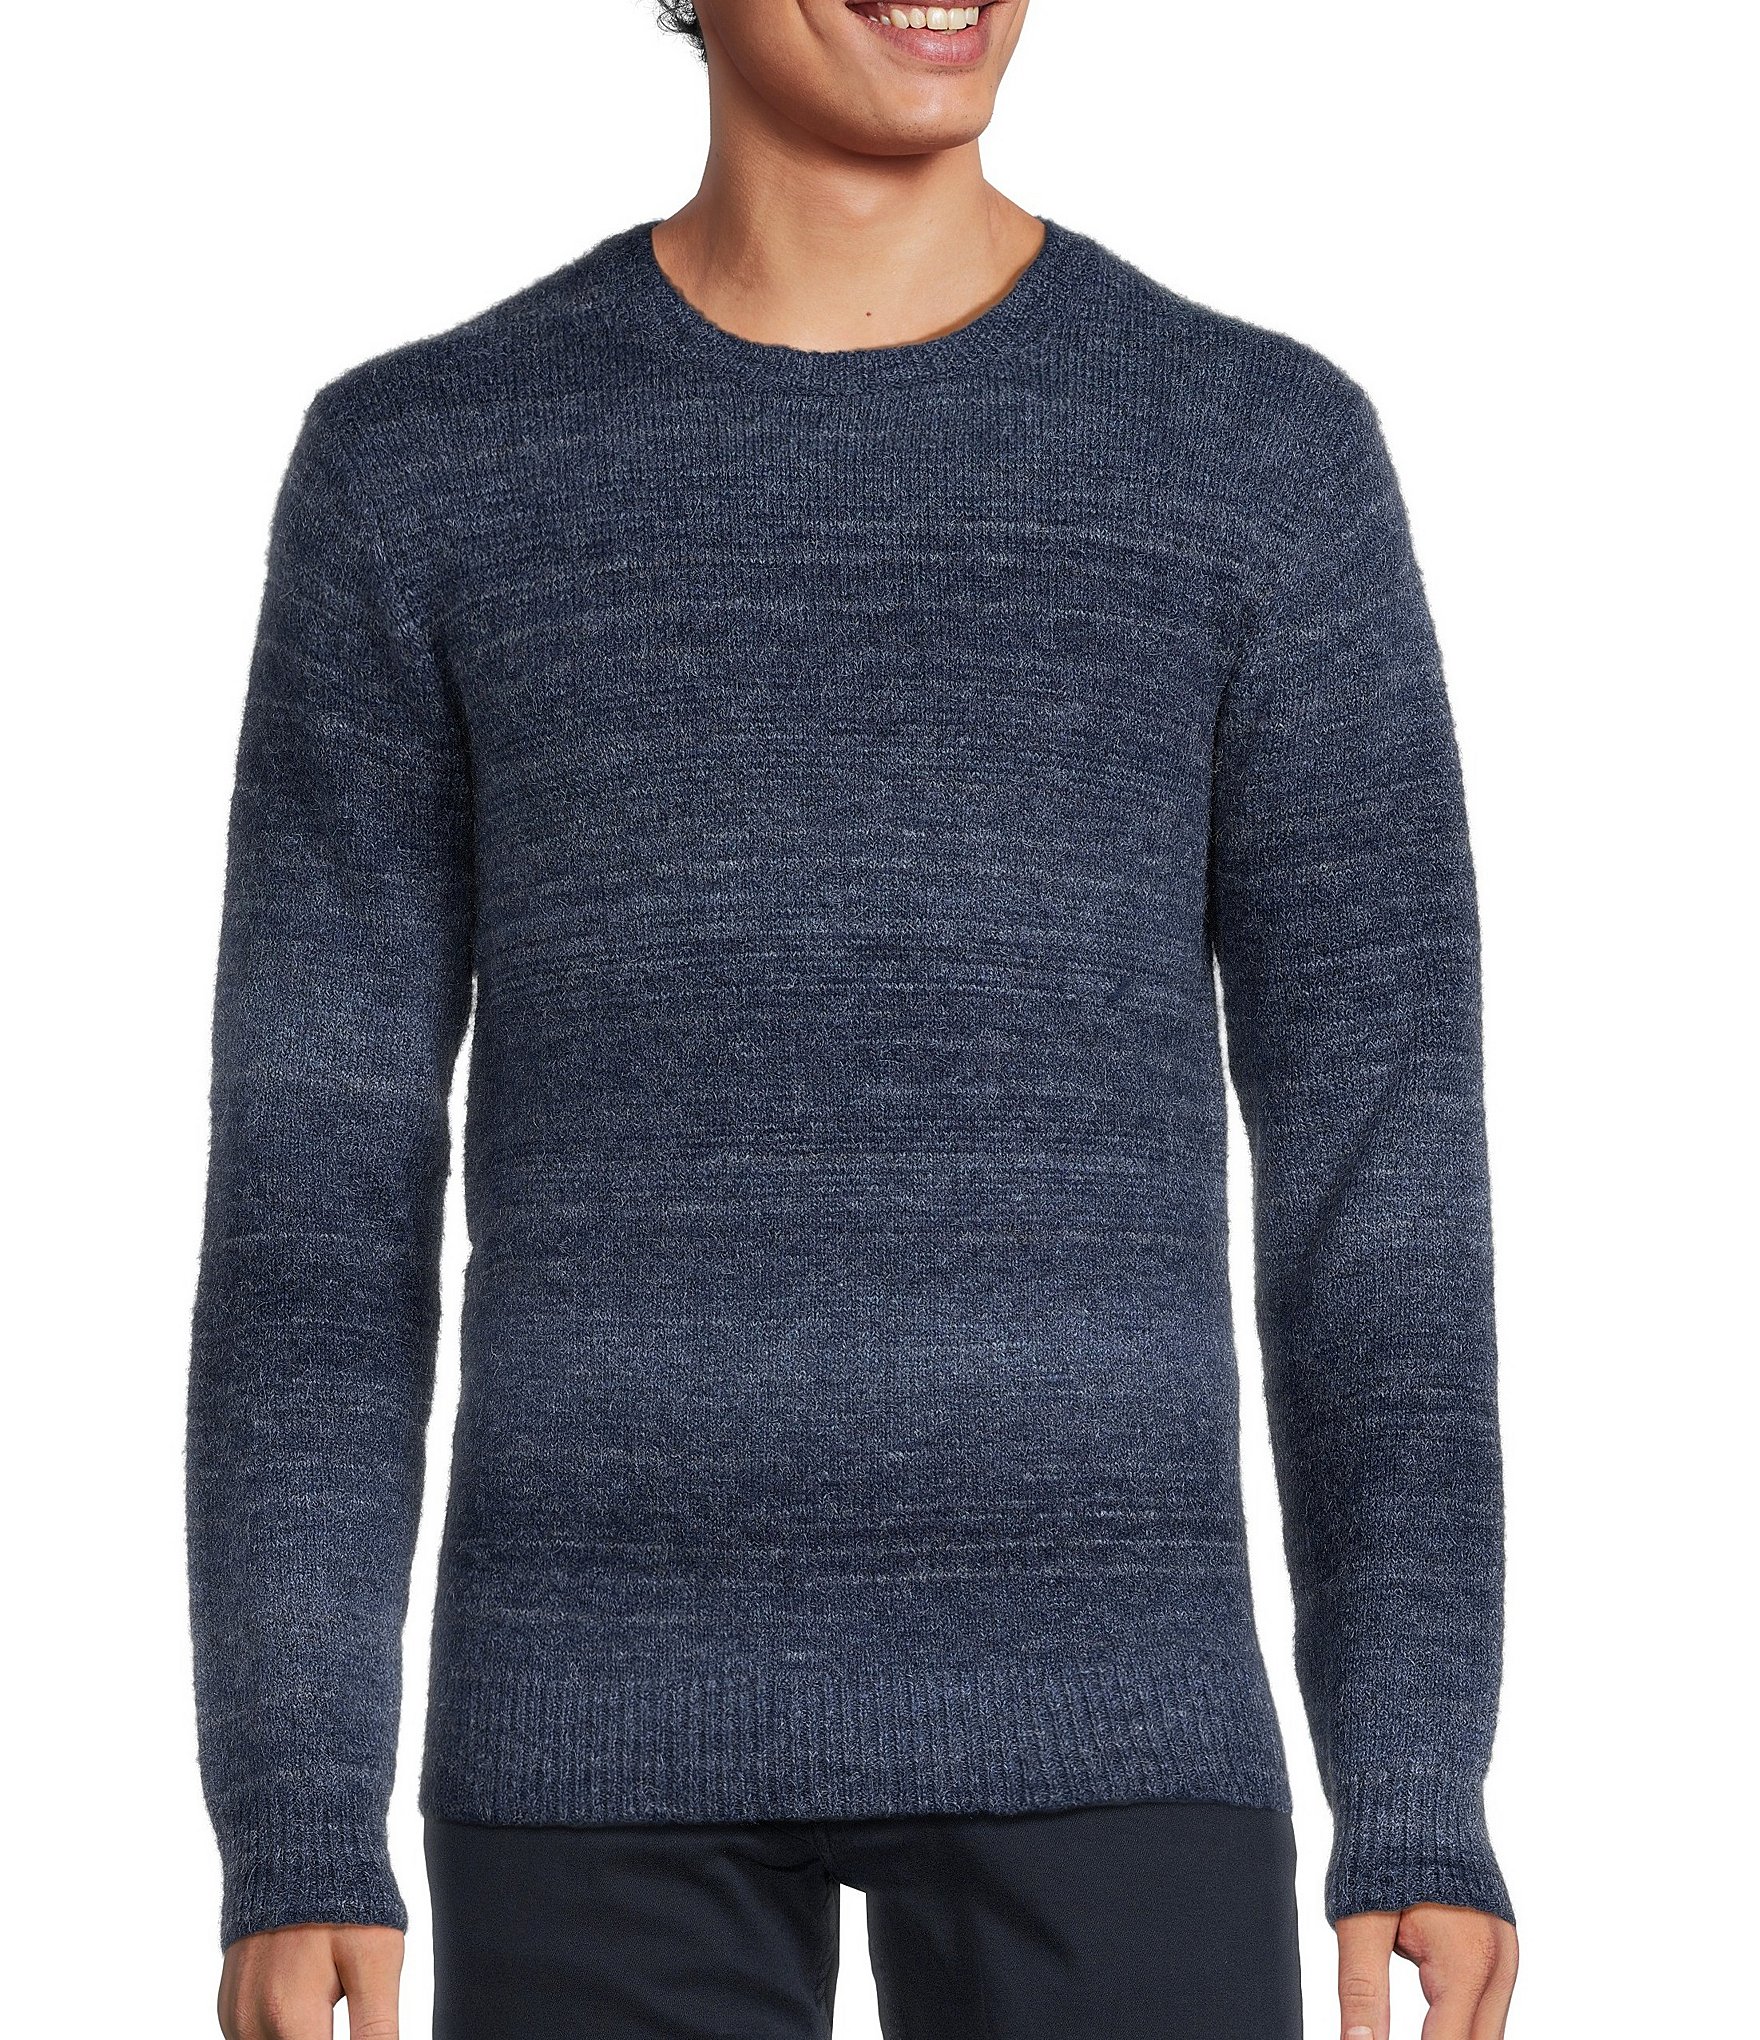 https://dimg.dillards.com/is/image/DillardsZoom/zoom/rowm-into-the-blue-collection-long-sleeve-spacedye-multicolor-crew-neck-sweater/00000000_zi_f097c8a8-9cc7-4299-8a3d-e173a0cf9ba3.jpg